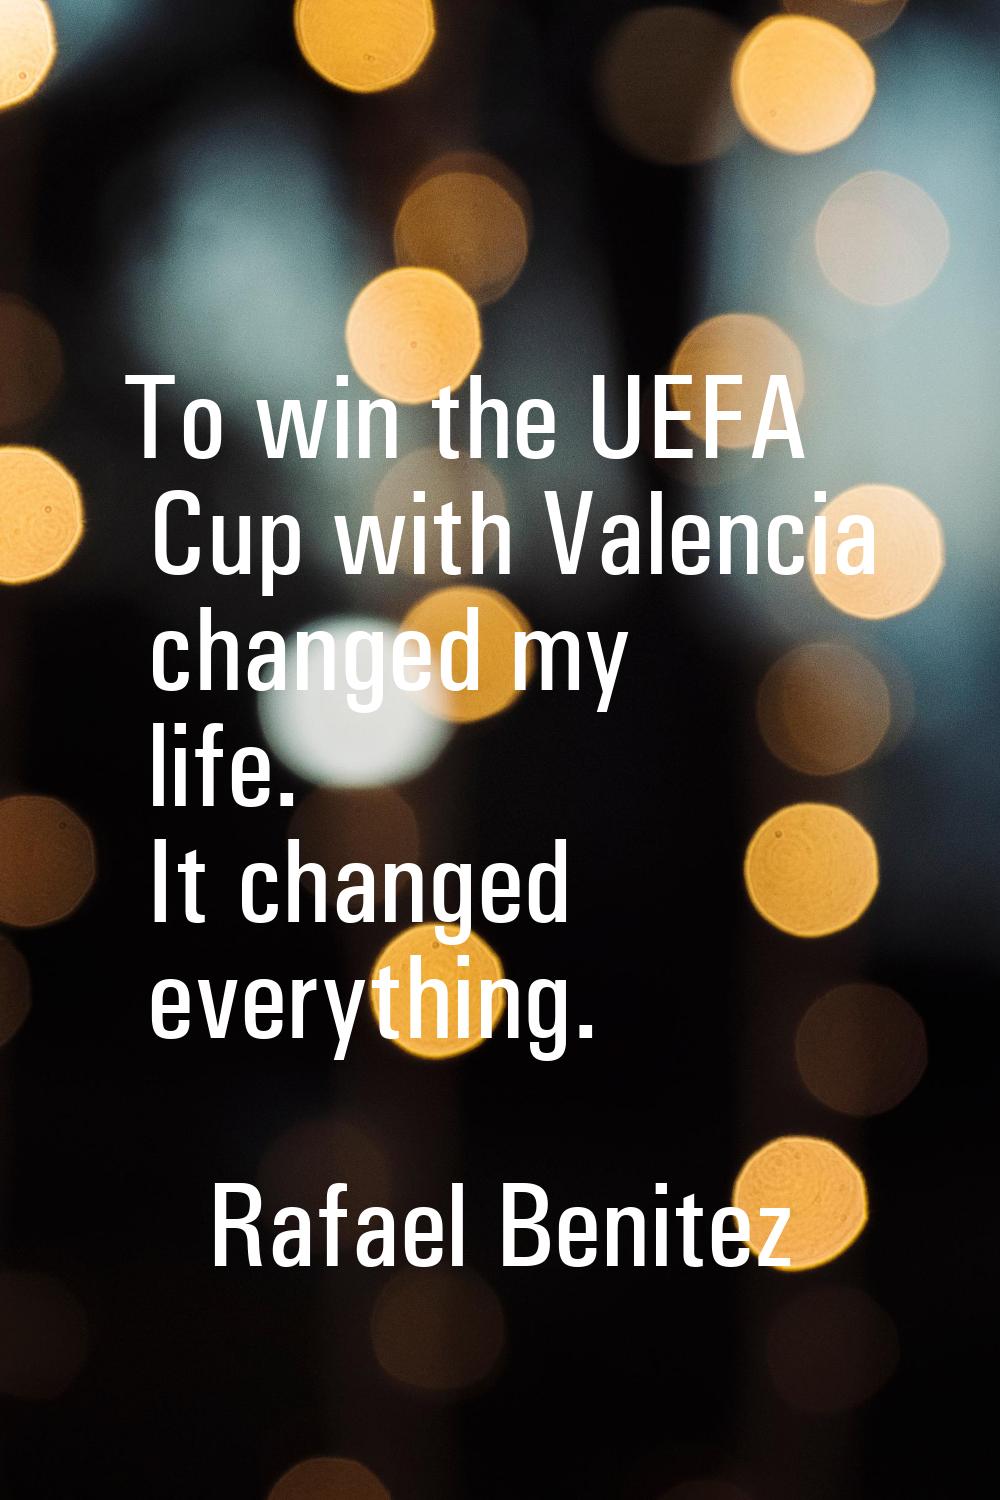 To win the UEFA Cup with Valencia changed my life. It changed everything.